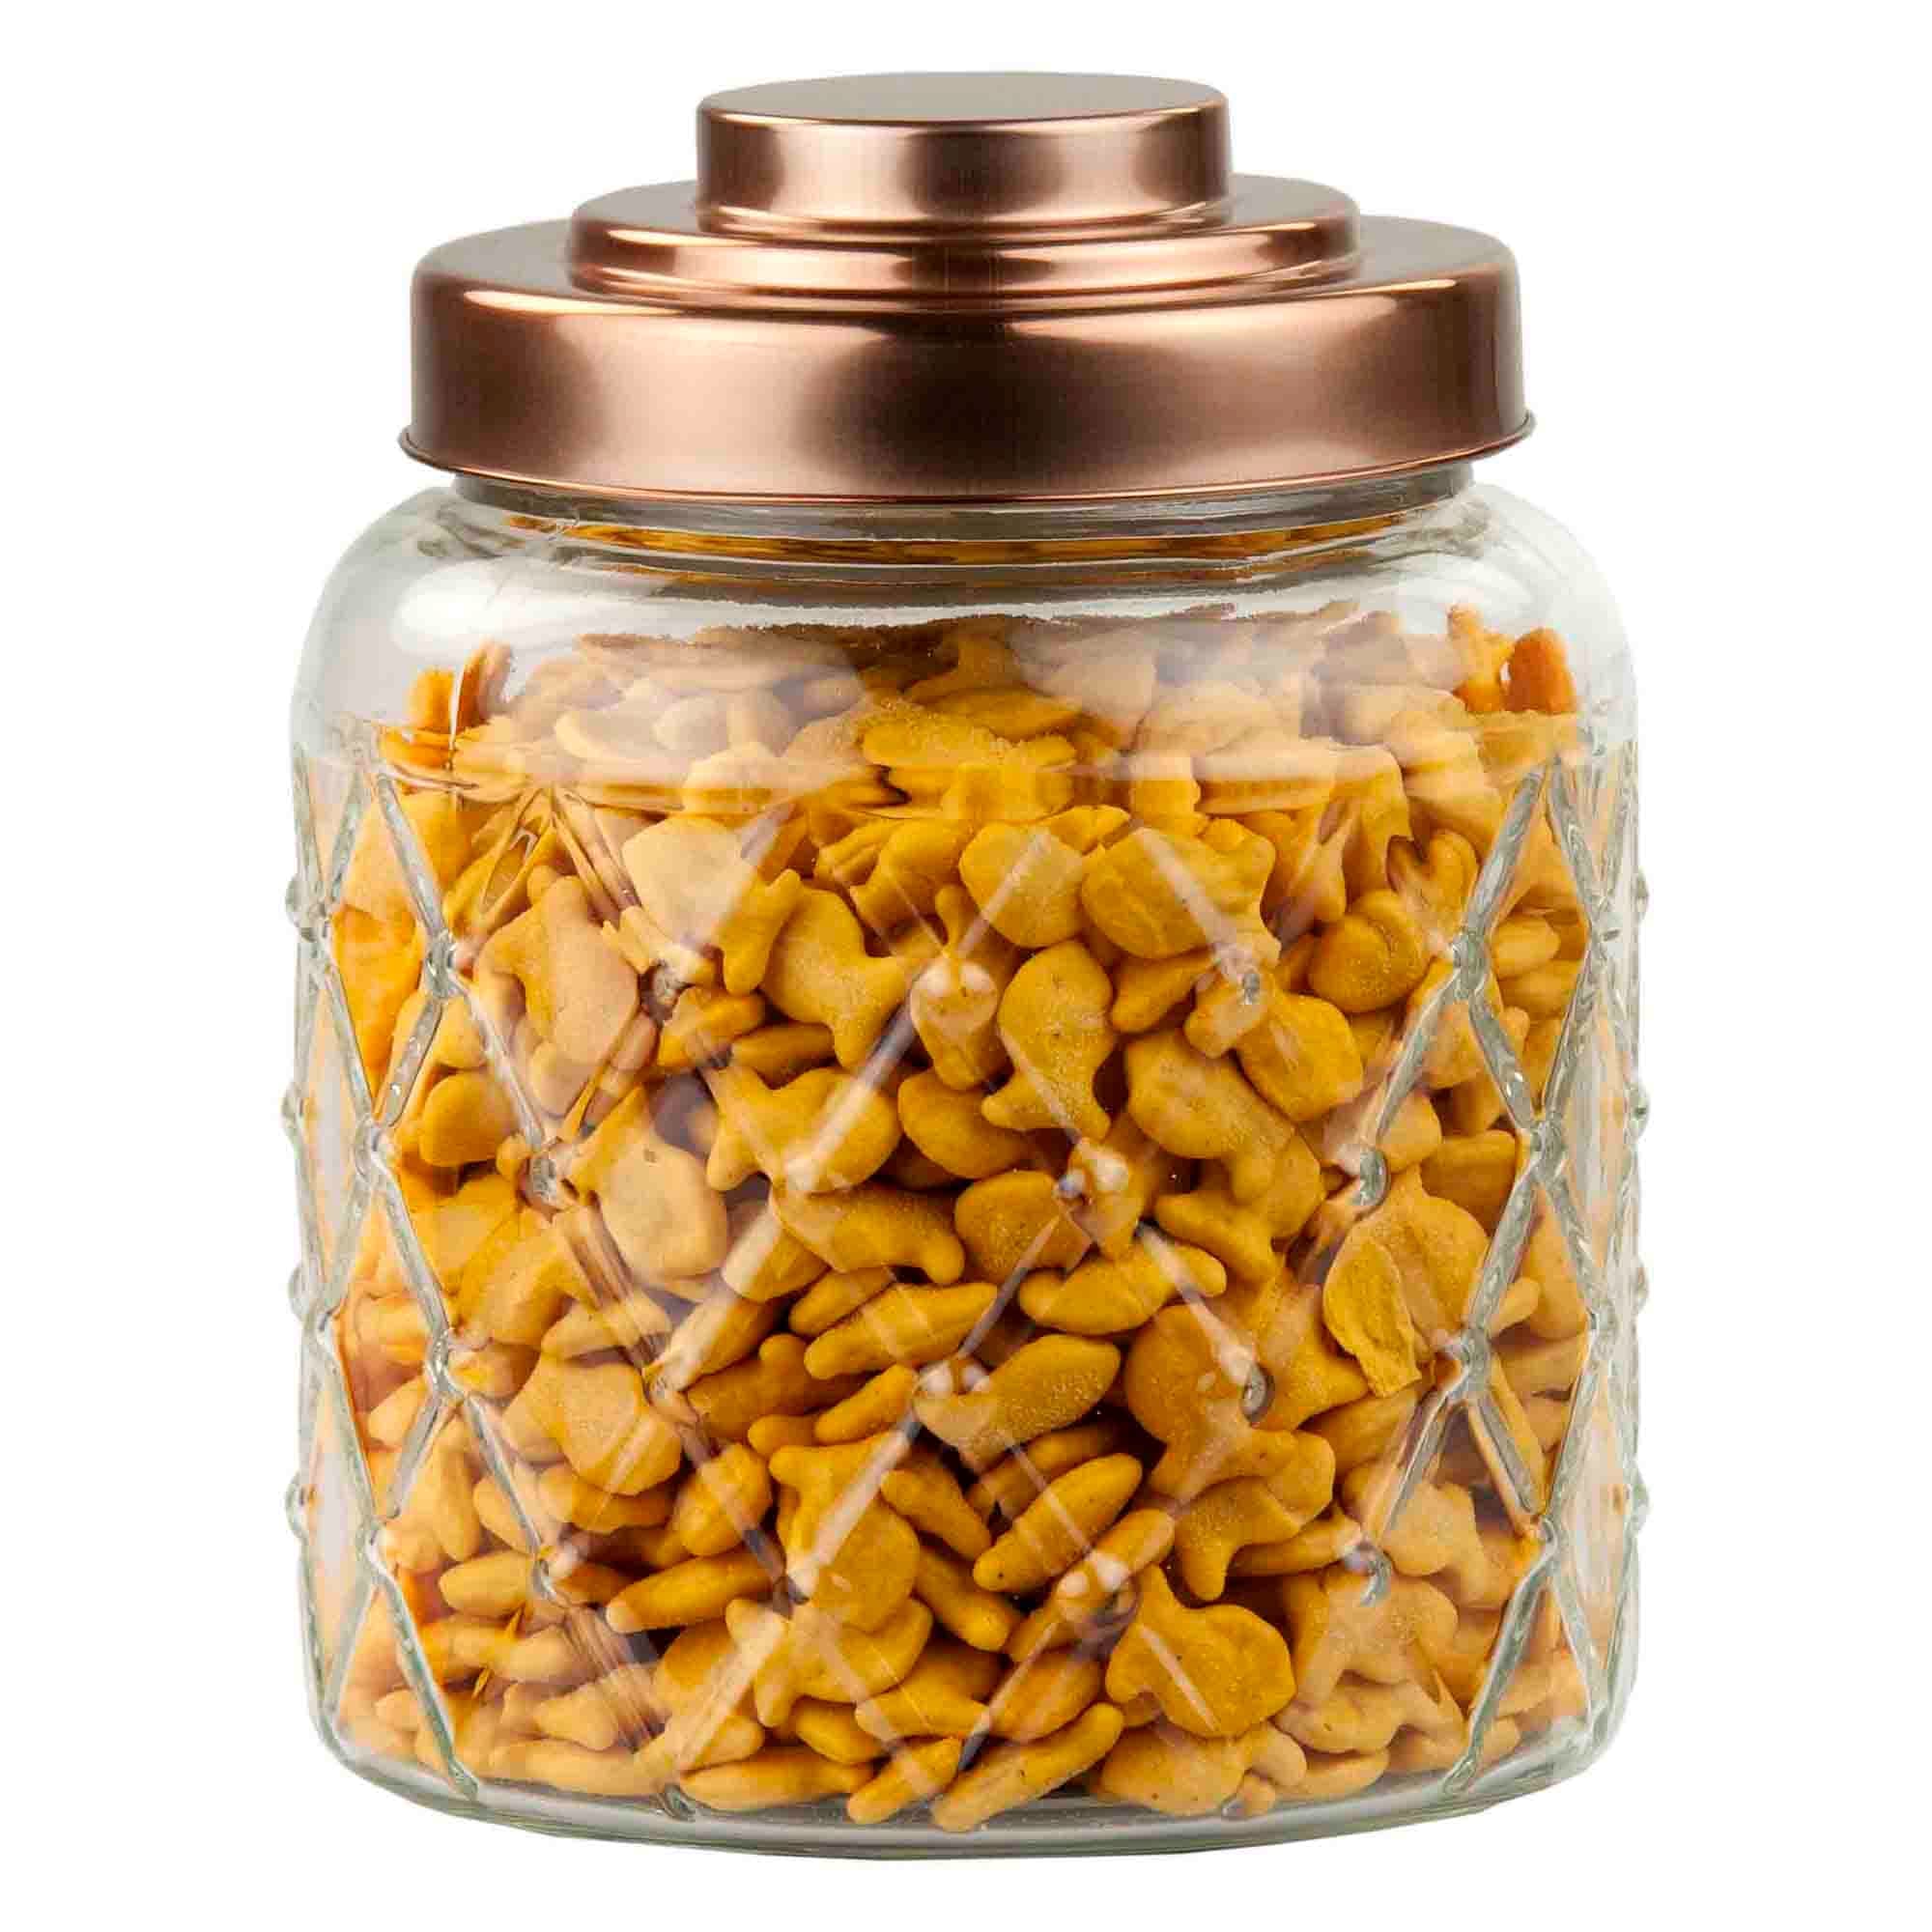 Home Basics Small 2.6 Lt Textured Glass Jar With Gleaming Copper Top $5.00 EACH, CASE PACK OF 6